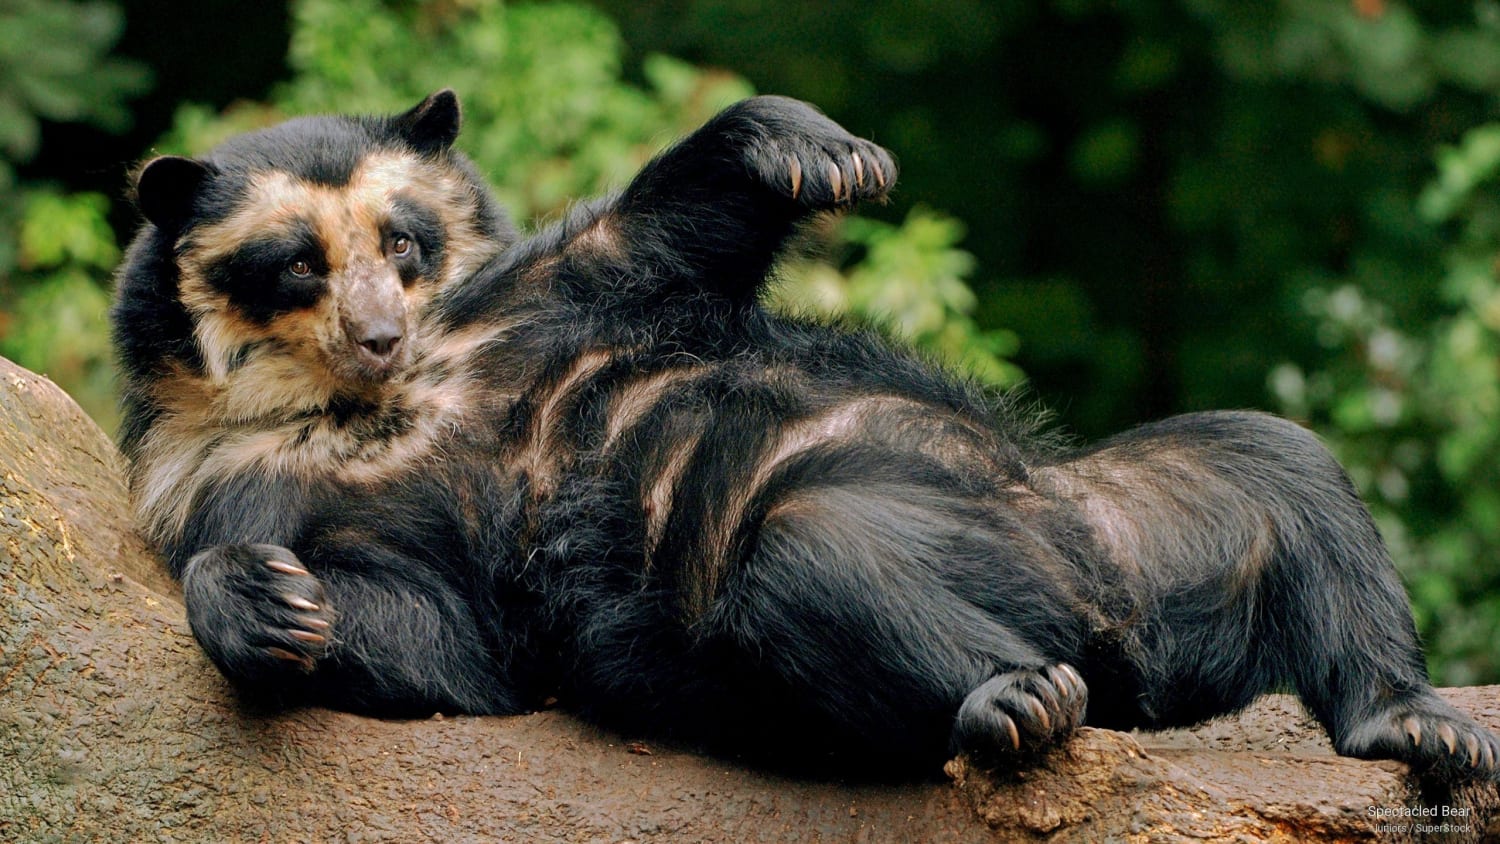 Spectacled Bear, not only is it the only South American Bear but it is the sole surviving member of the Short-Faced Bear group. Despite this, they're relatively small, almost strictly vegetarian and so docile/shy they only fight in self-defense or protecting their cubs with only one known death.